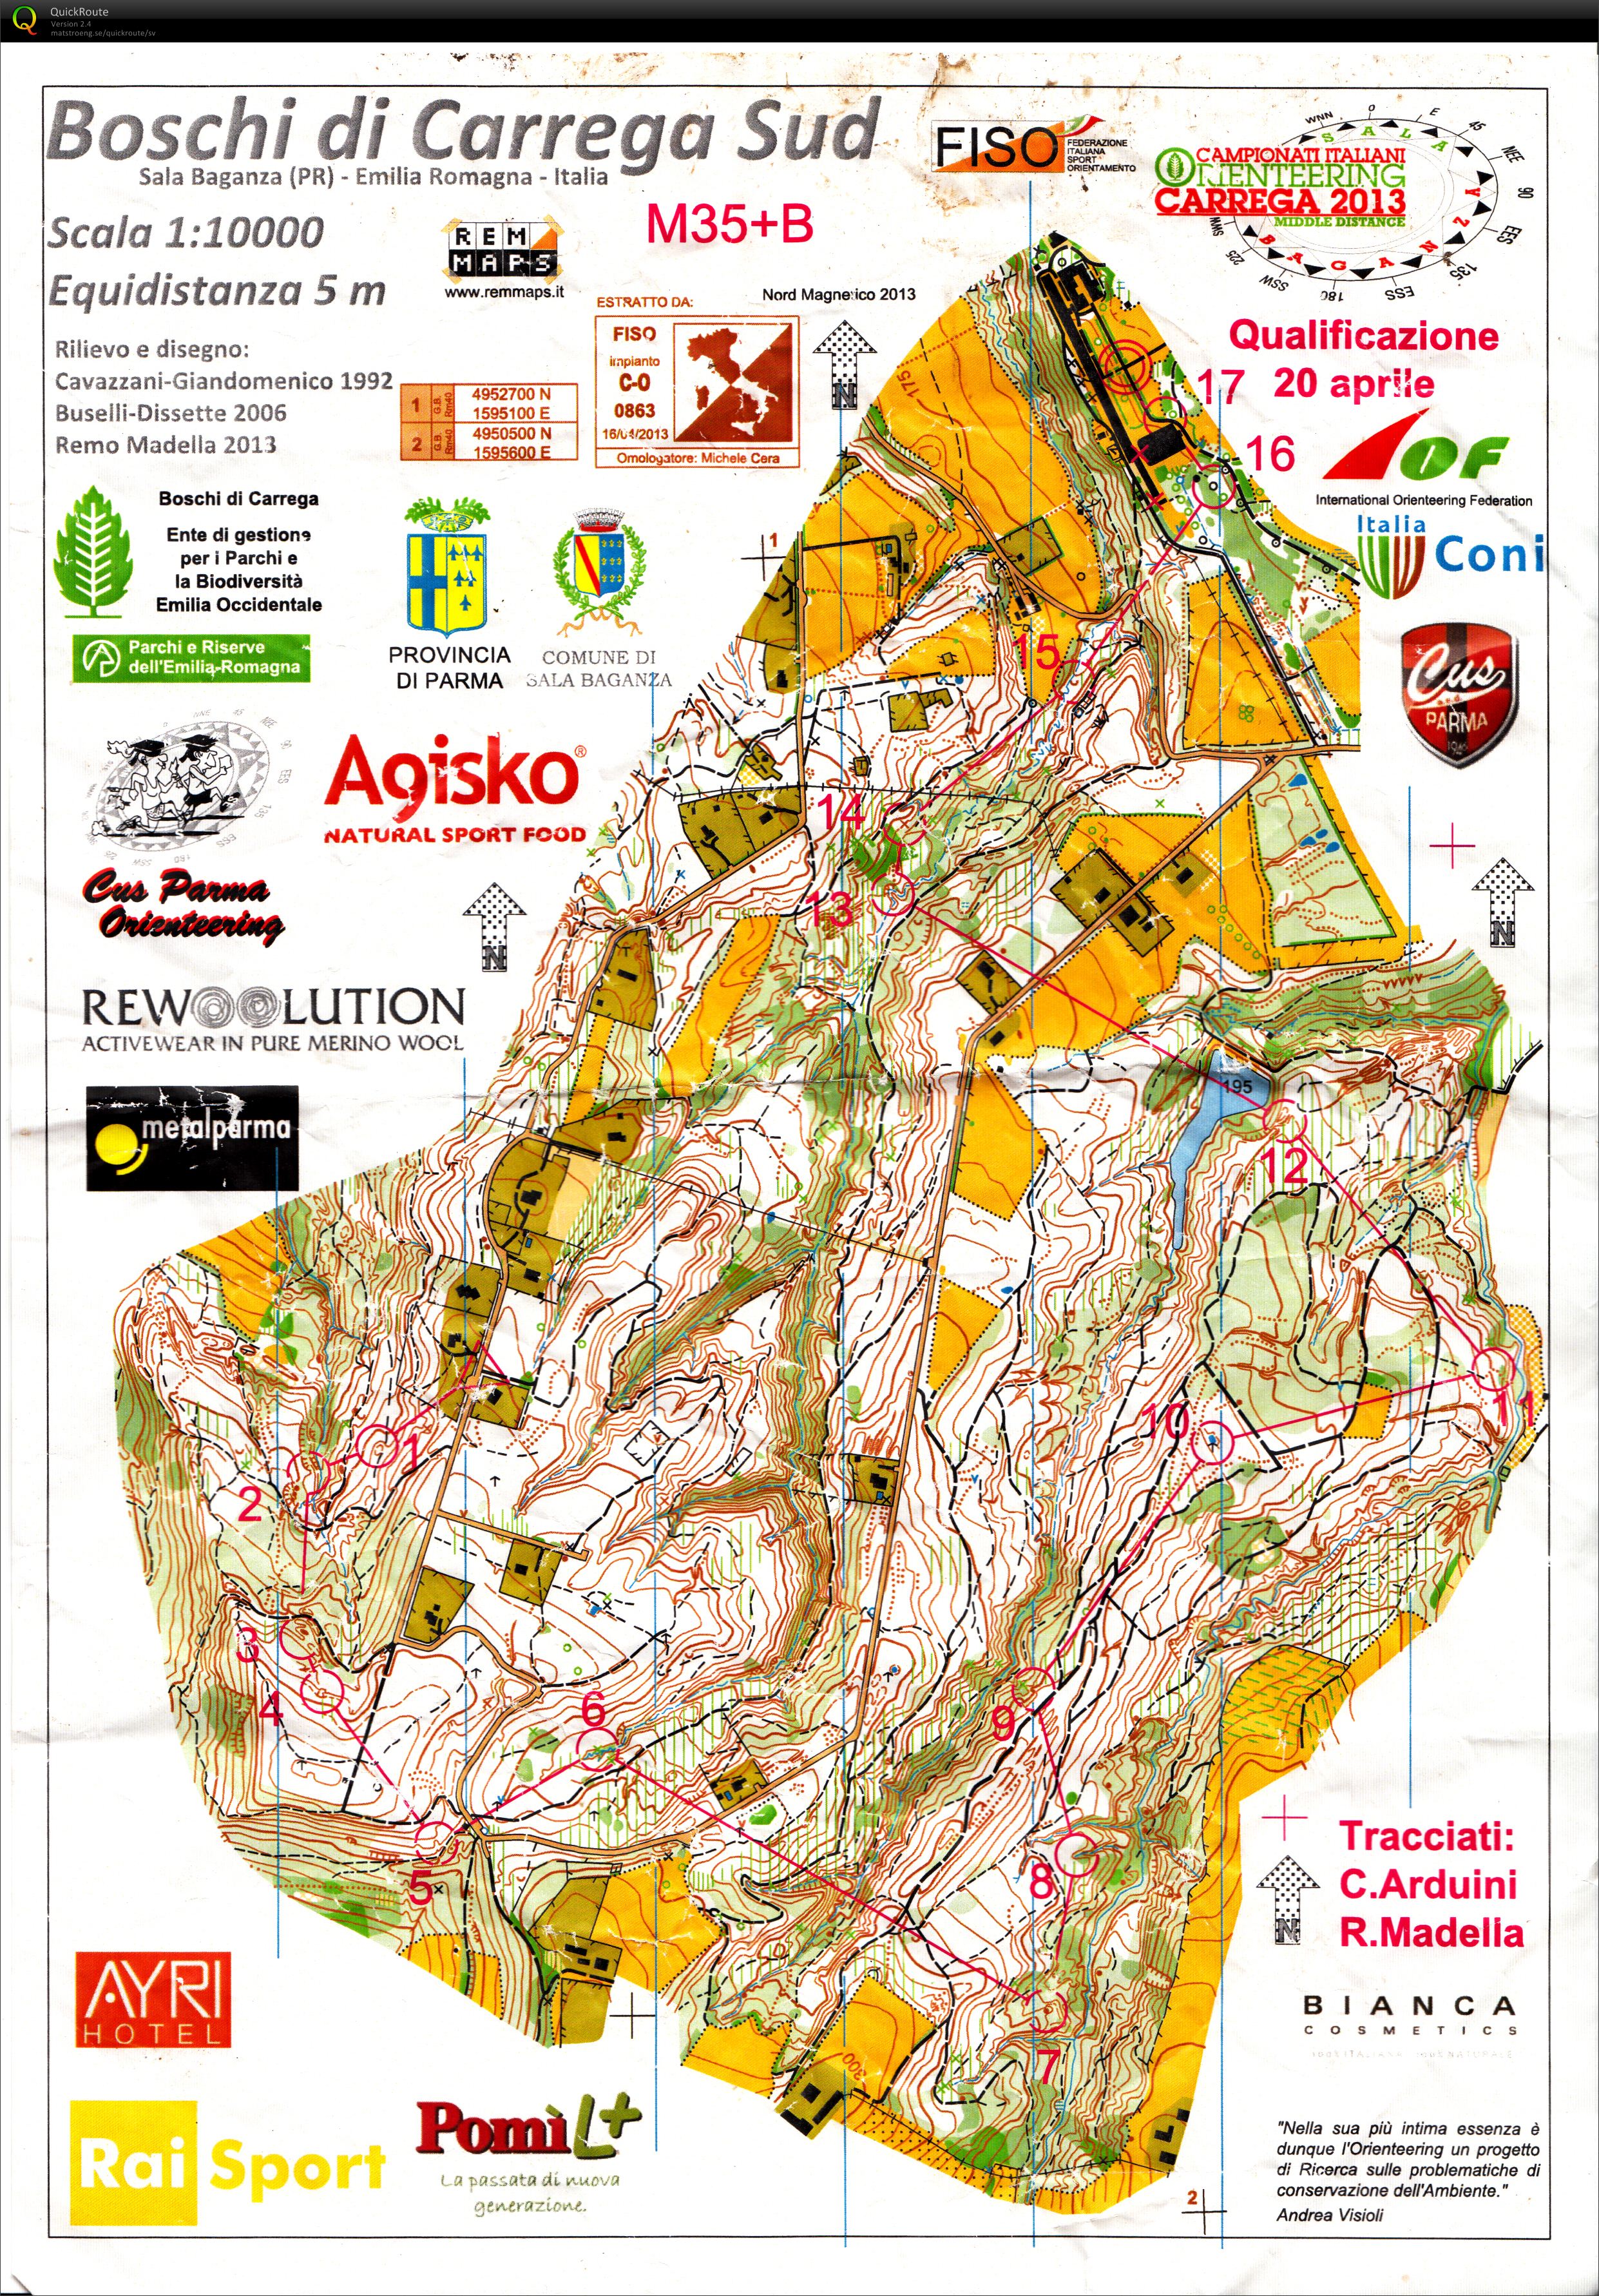 Italian Championship Middle Distance Qualification (20-04-2013)